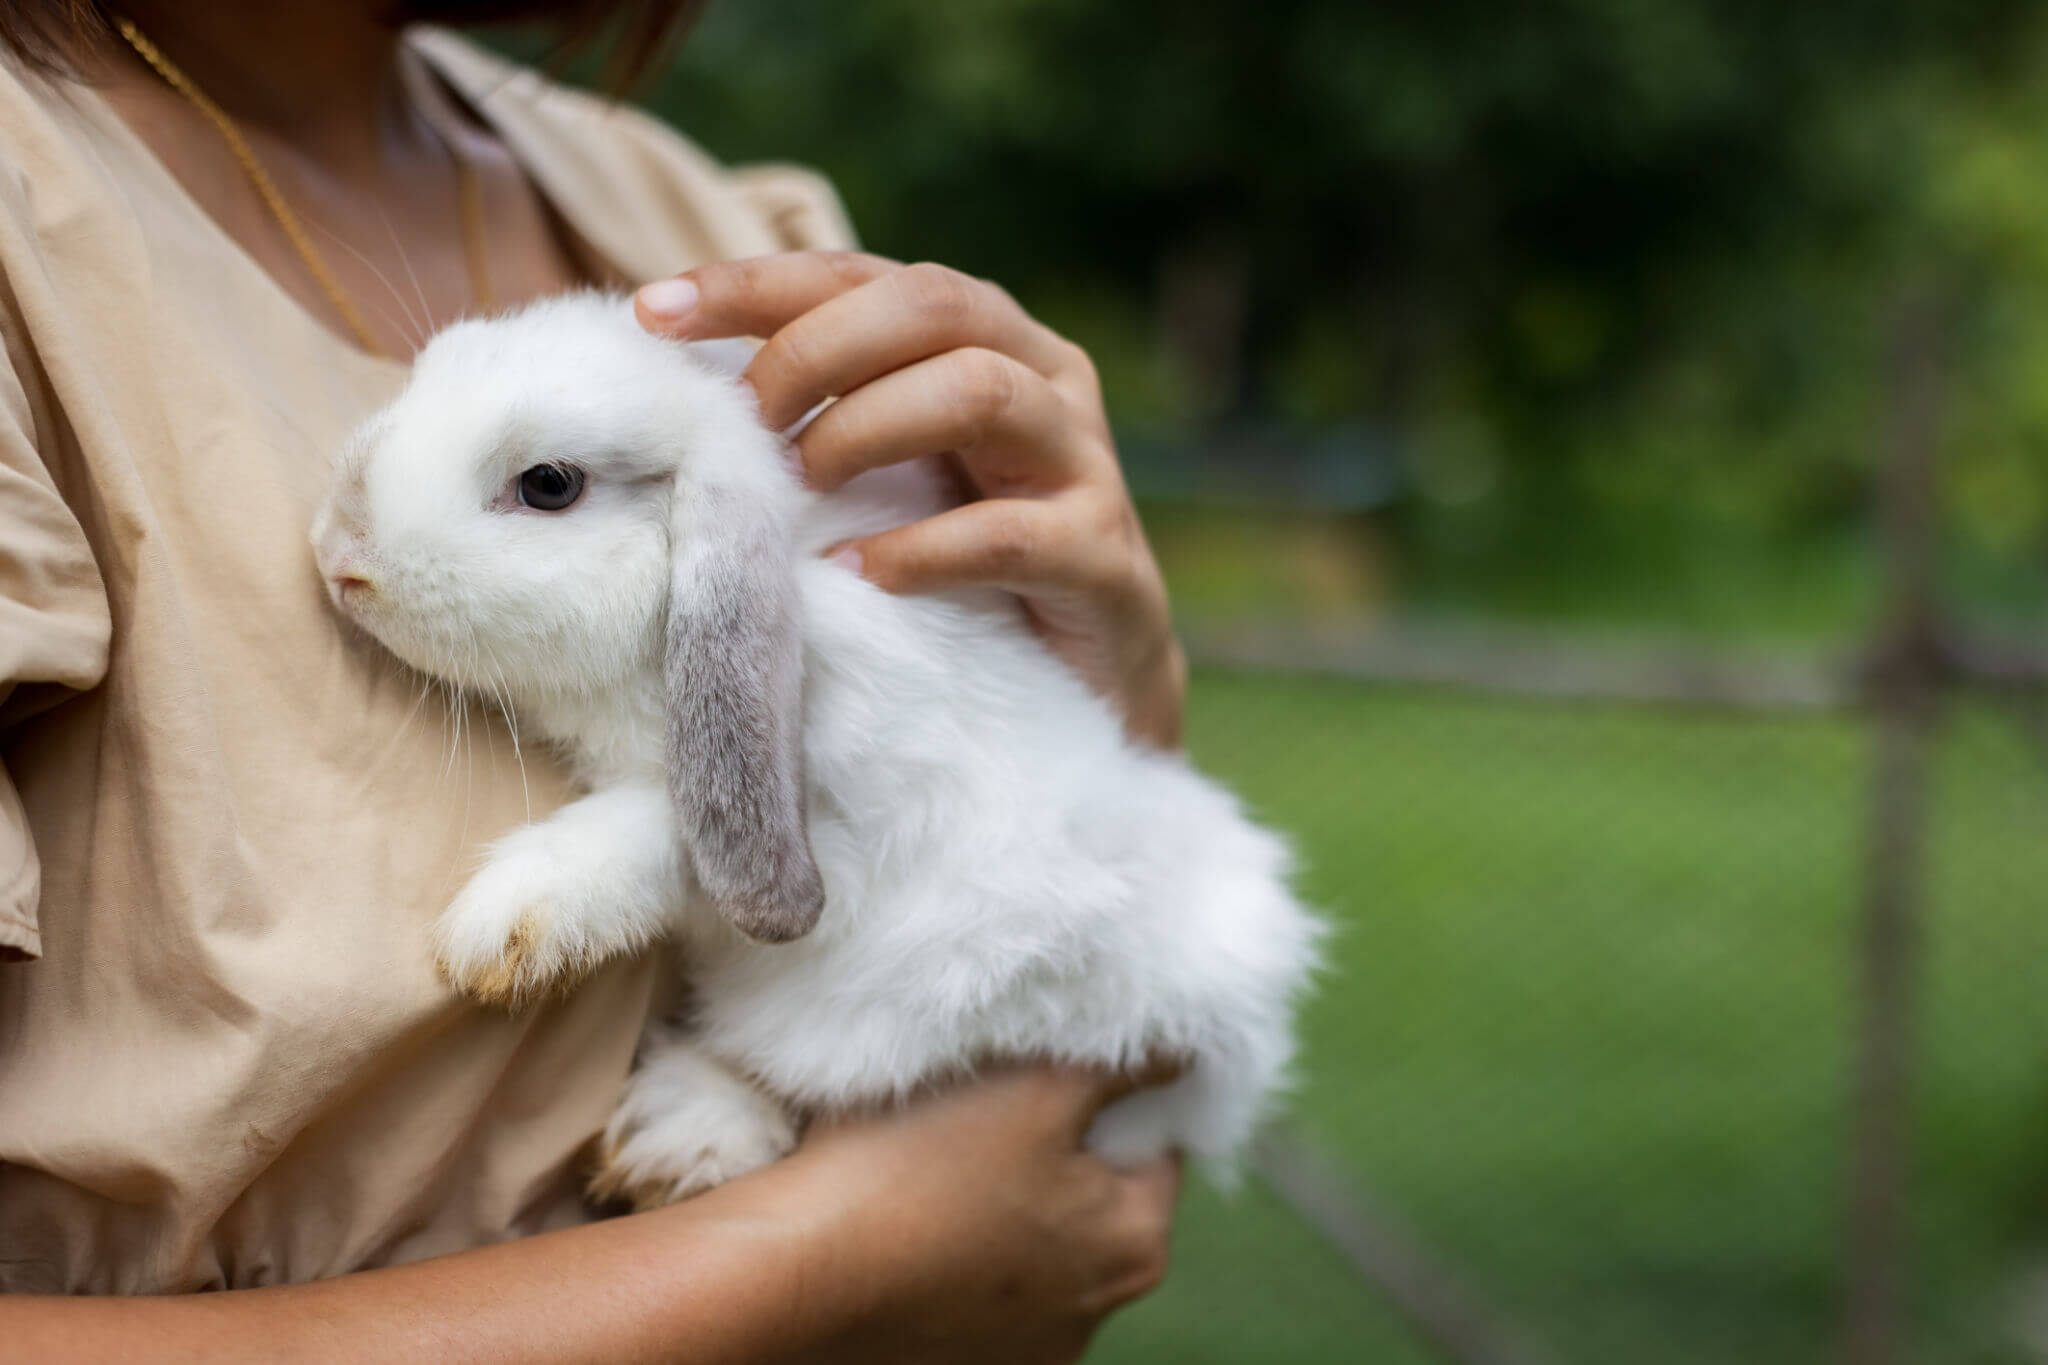 Caring For Your Rabbits In The Summer Months